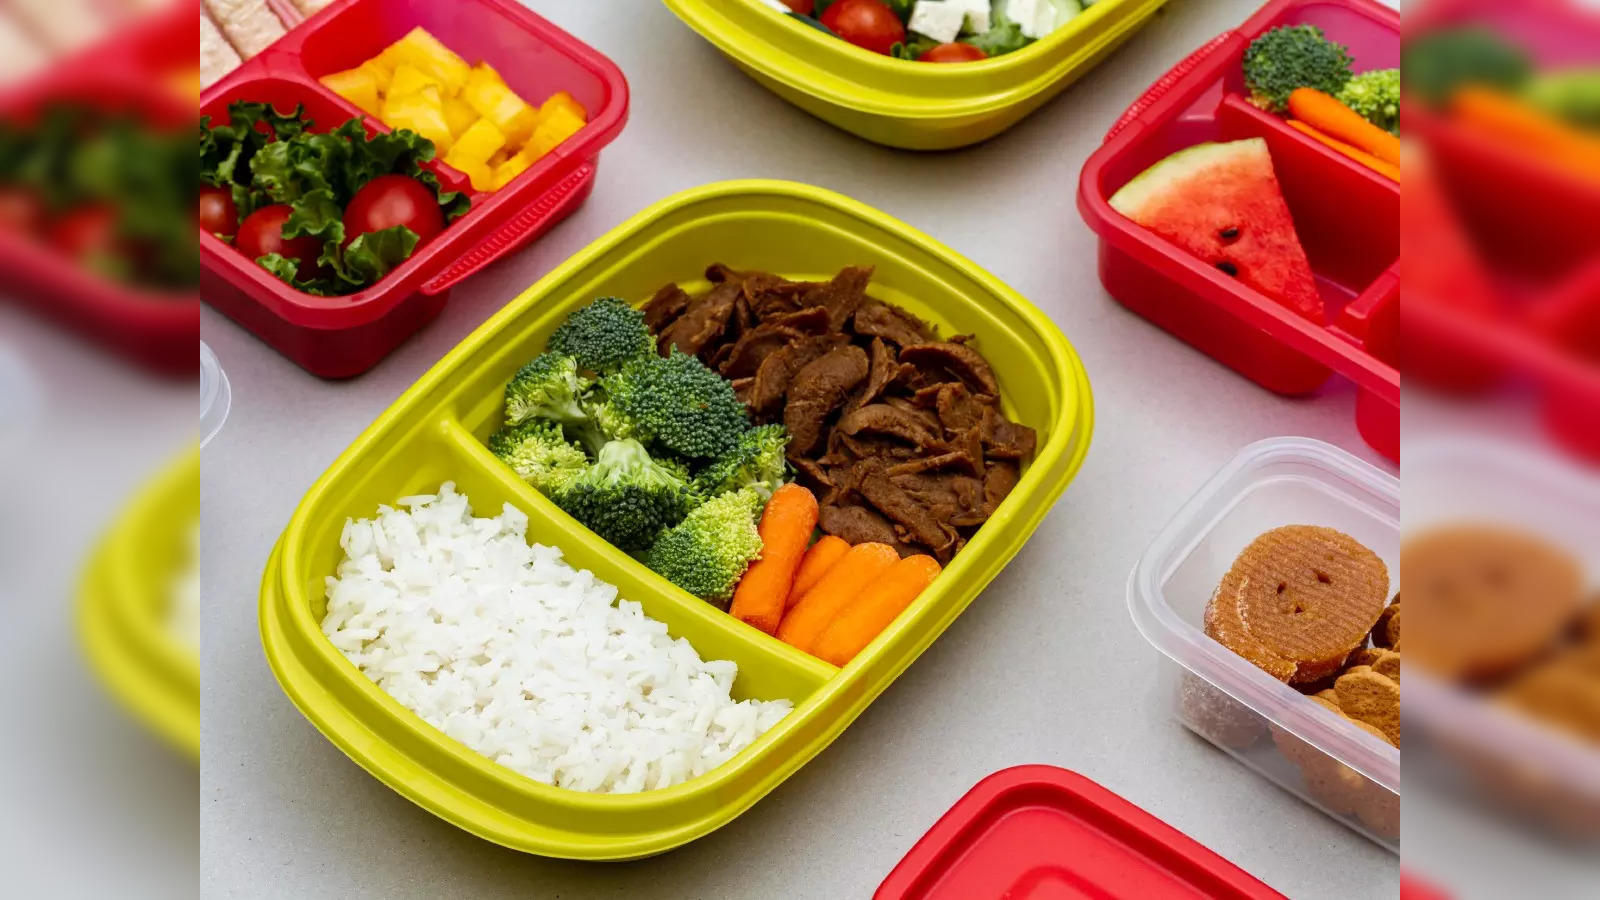 How Safe is Child's Food in Plastic Lunch Box? Reusing Risks